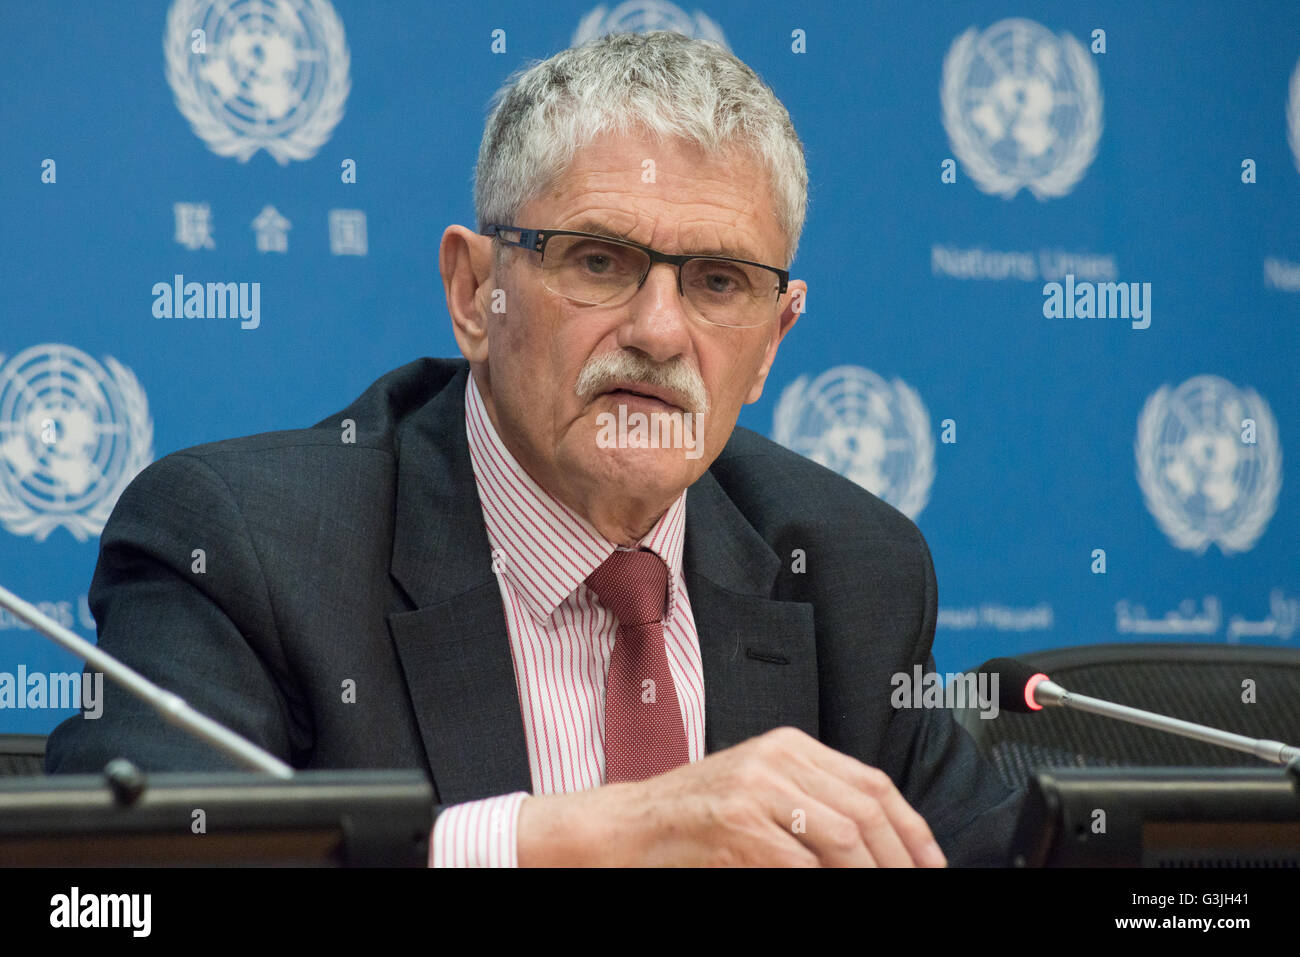 New York, United States. 18th Apr, 2016. General Assembly President Lykketoft speaks to the UN press corps. Mogens Lykketoft, President of the Seventieth session of the United Nations General Aassembly, held a press conference to outline upcoming events pertaining to the signing ceremony for the Global Climate Agreement and the thematic debate on implementation of the Sustainable Development Goals. © Albin Lohr-Jones/Pacific Press/Alamy Live News Stock Photo